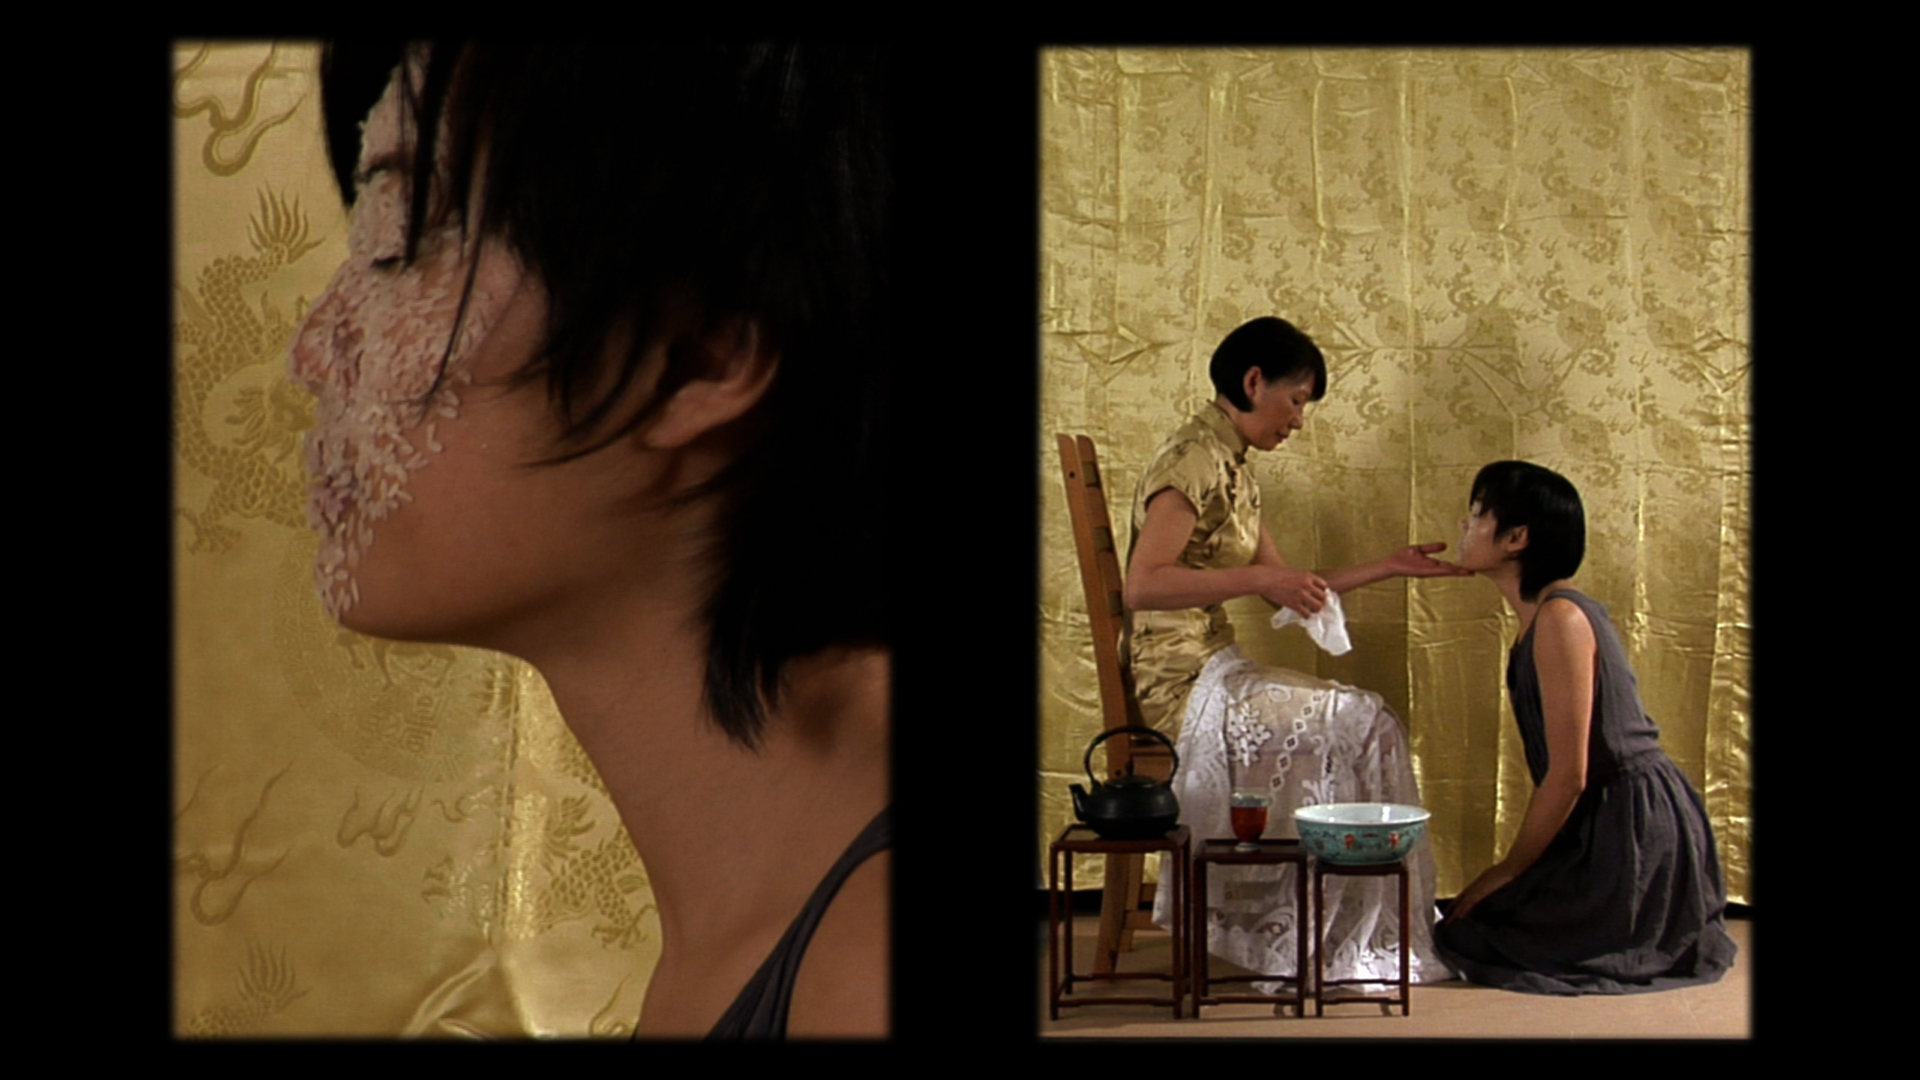 The women we want to be [mi cha] (2009) by Annie Onyi Cheung